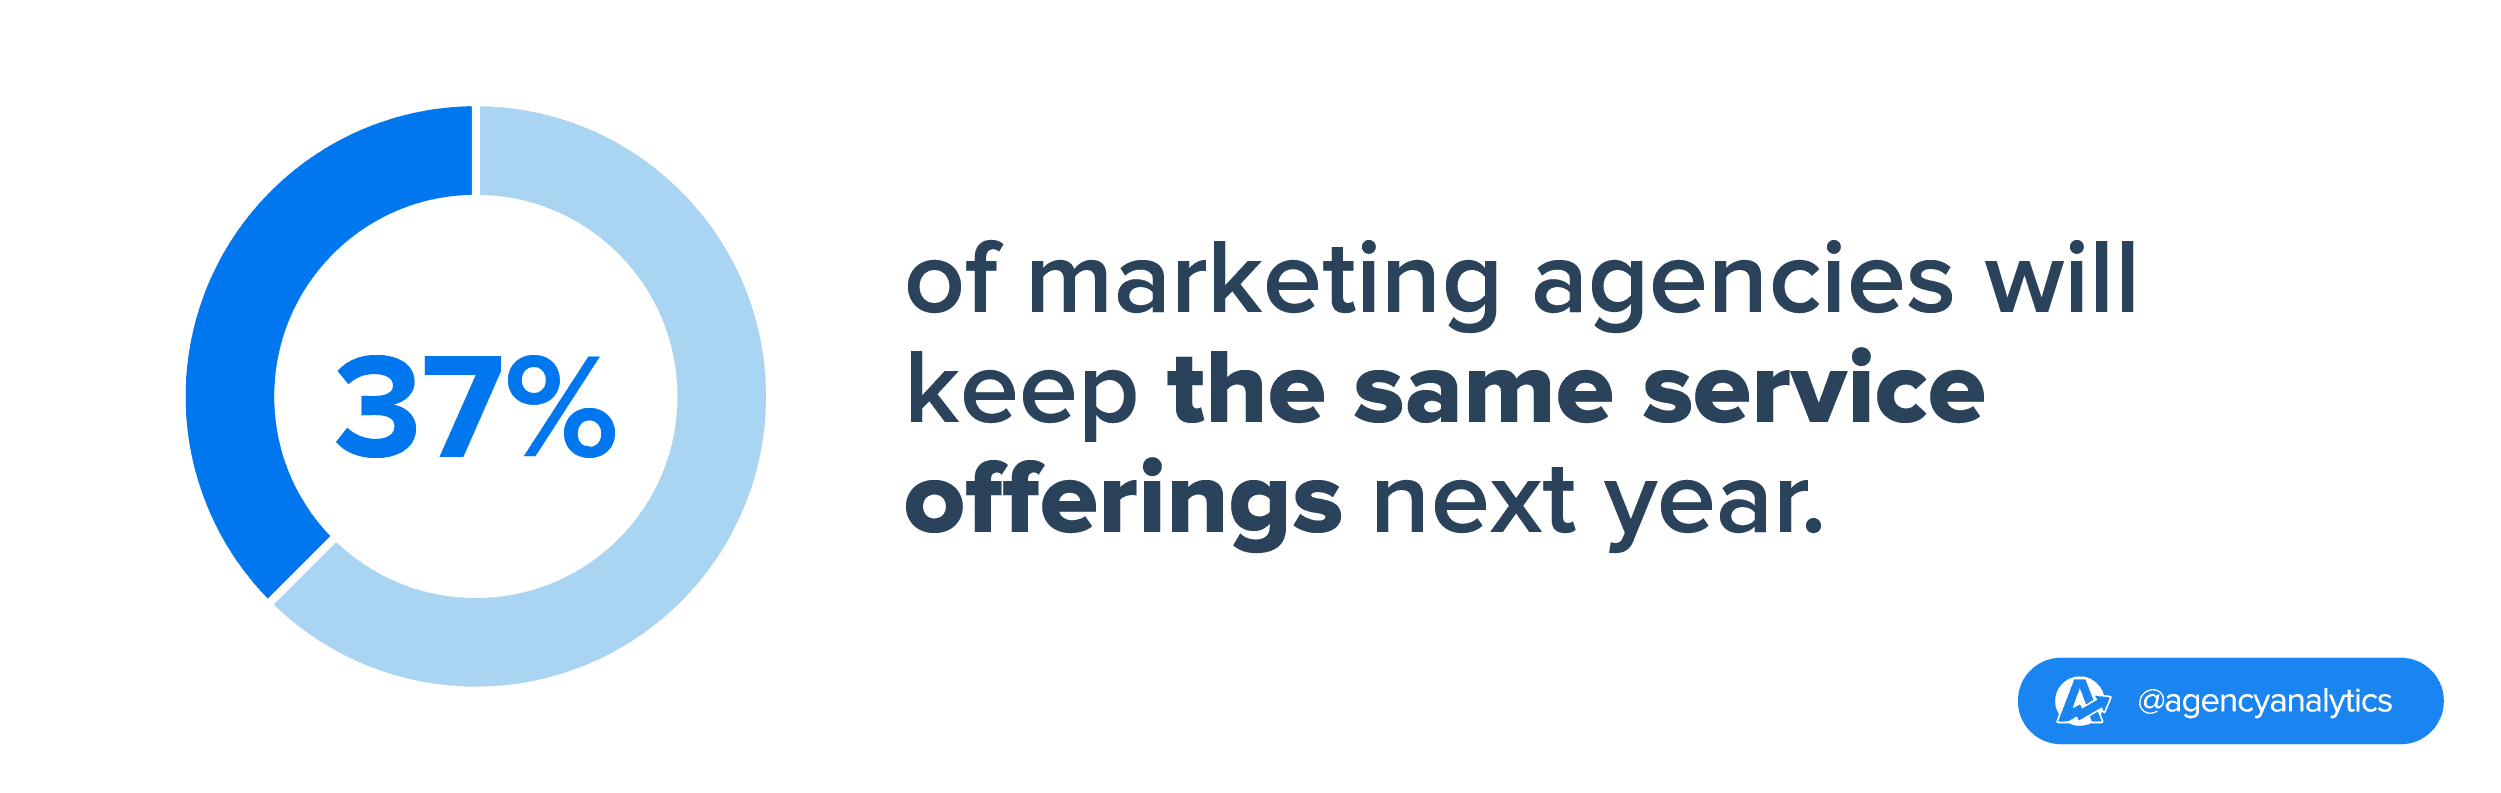 37% of marketing agencies are planning to offer the same services next year